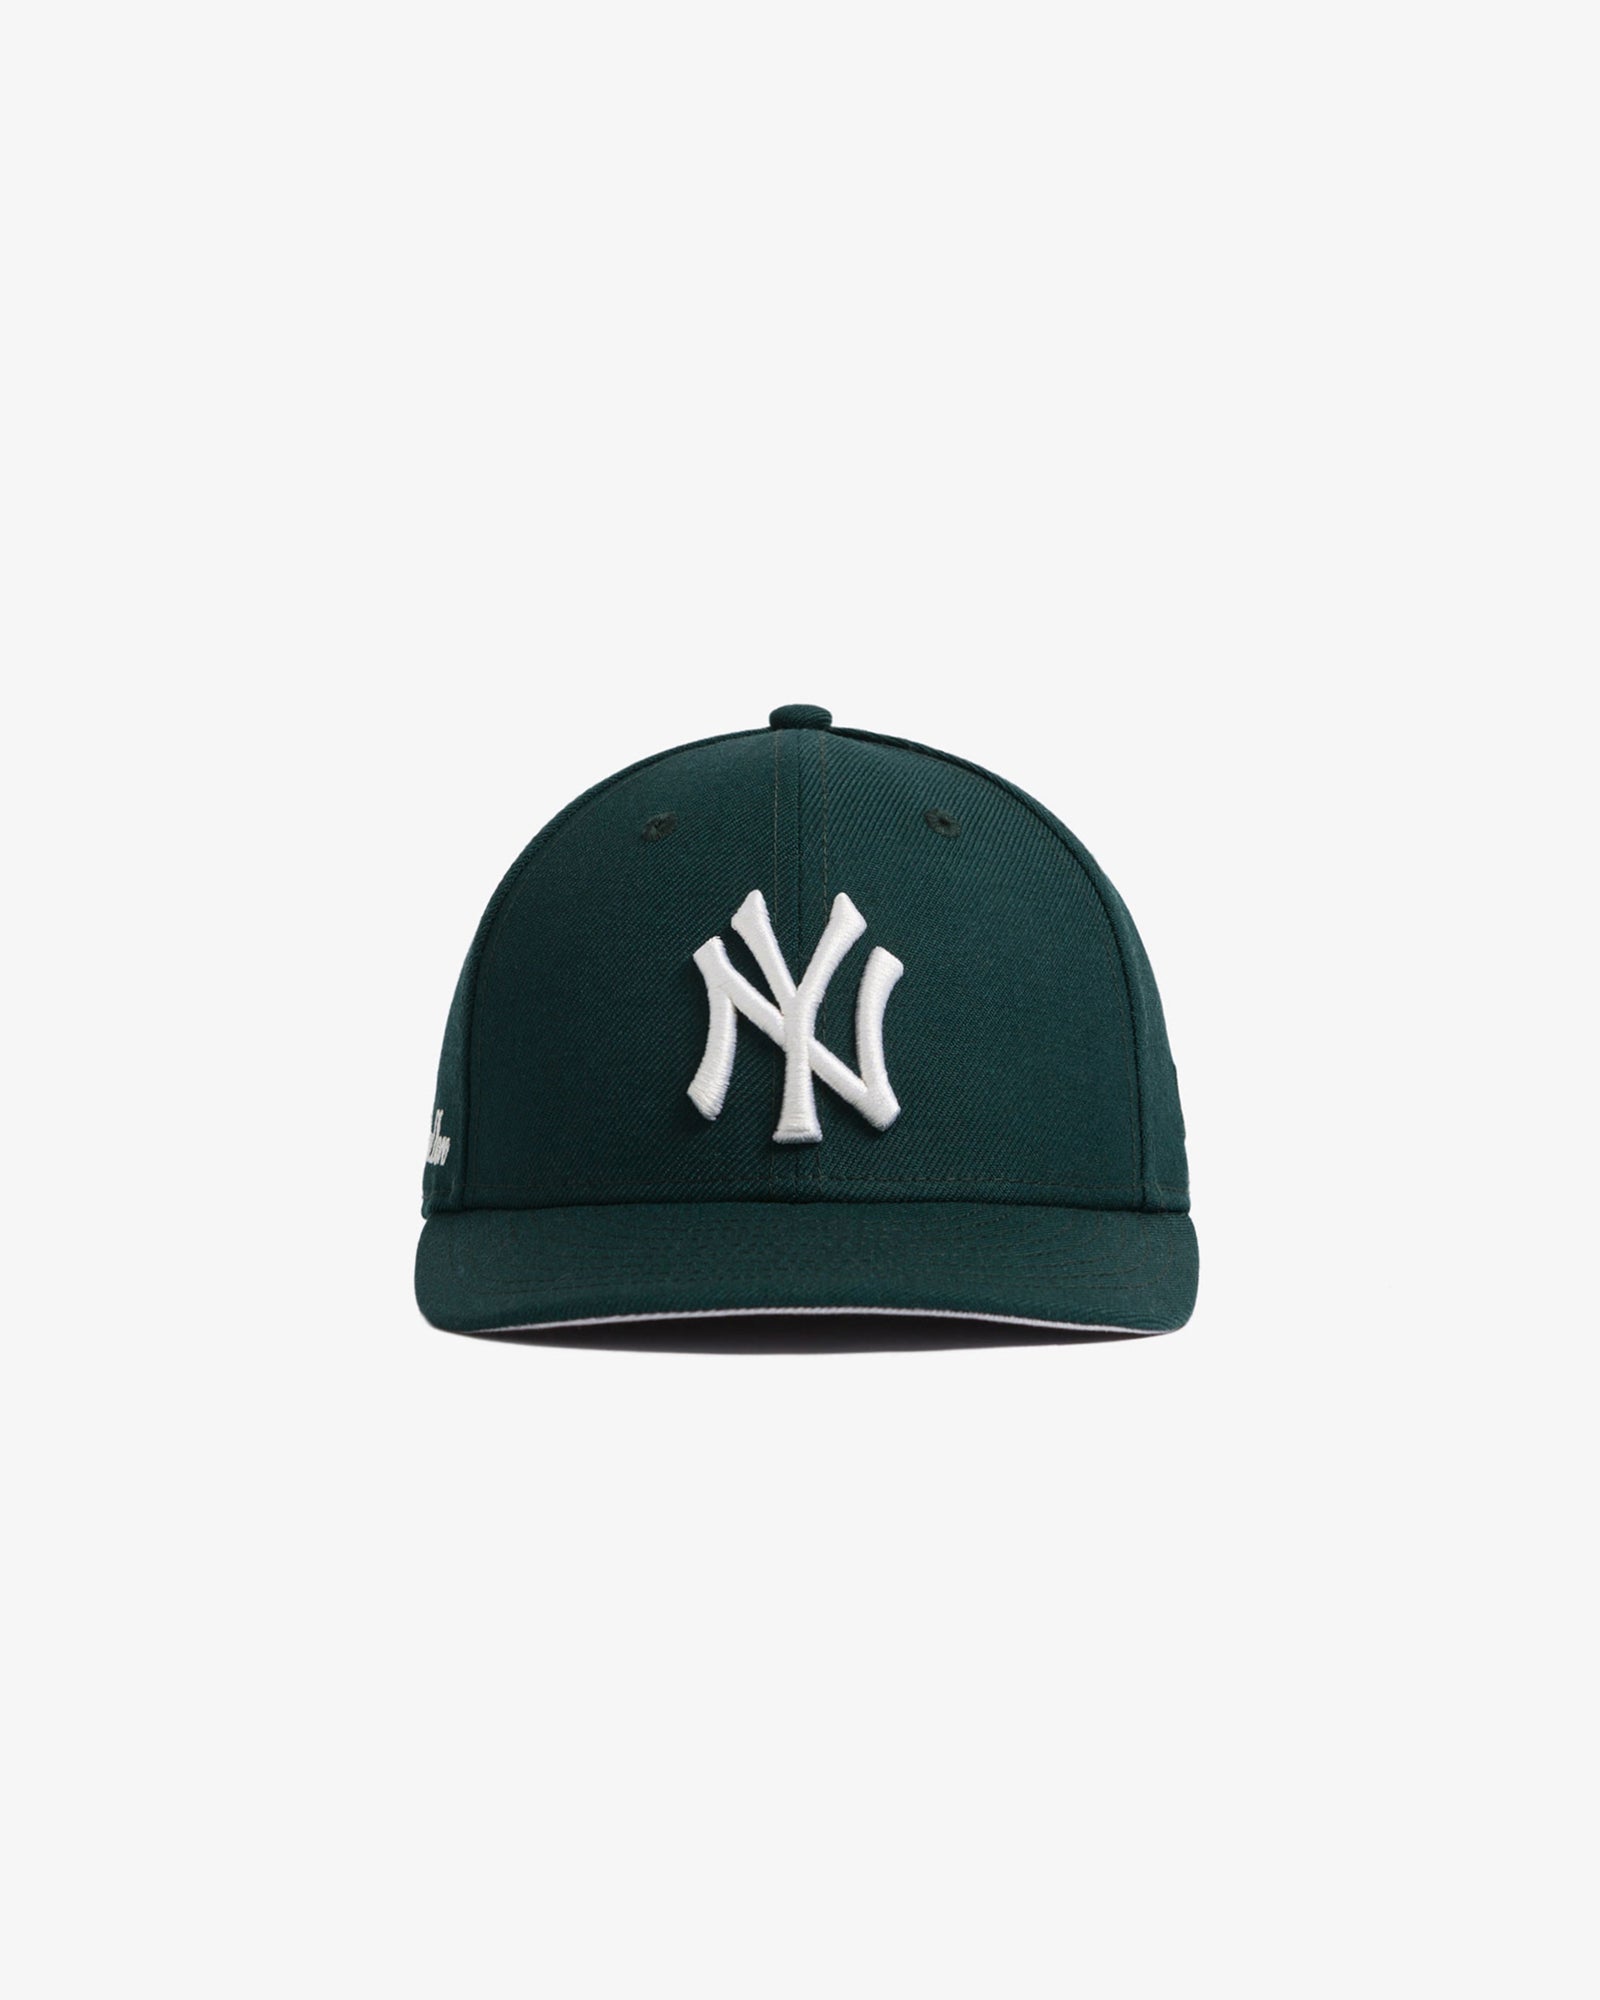 New York Yankees New Era Black/Red/Grey 59fifty Fitted Hat | mysite-1